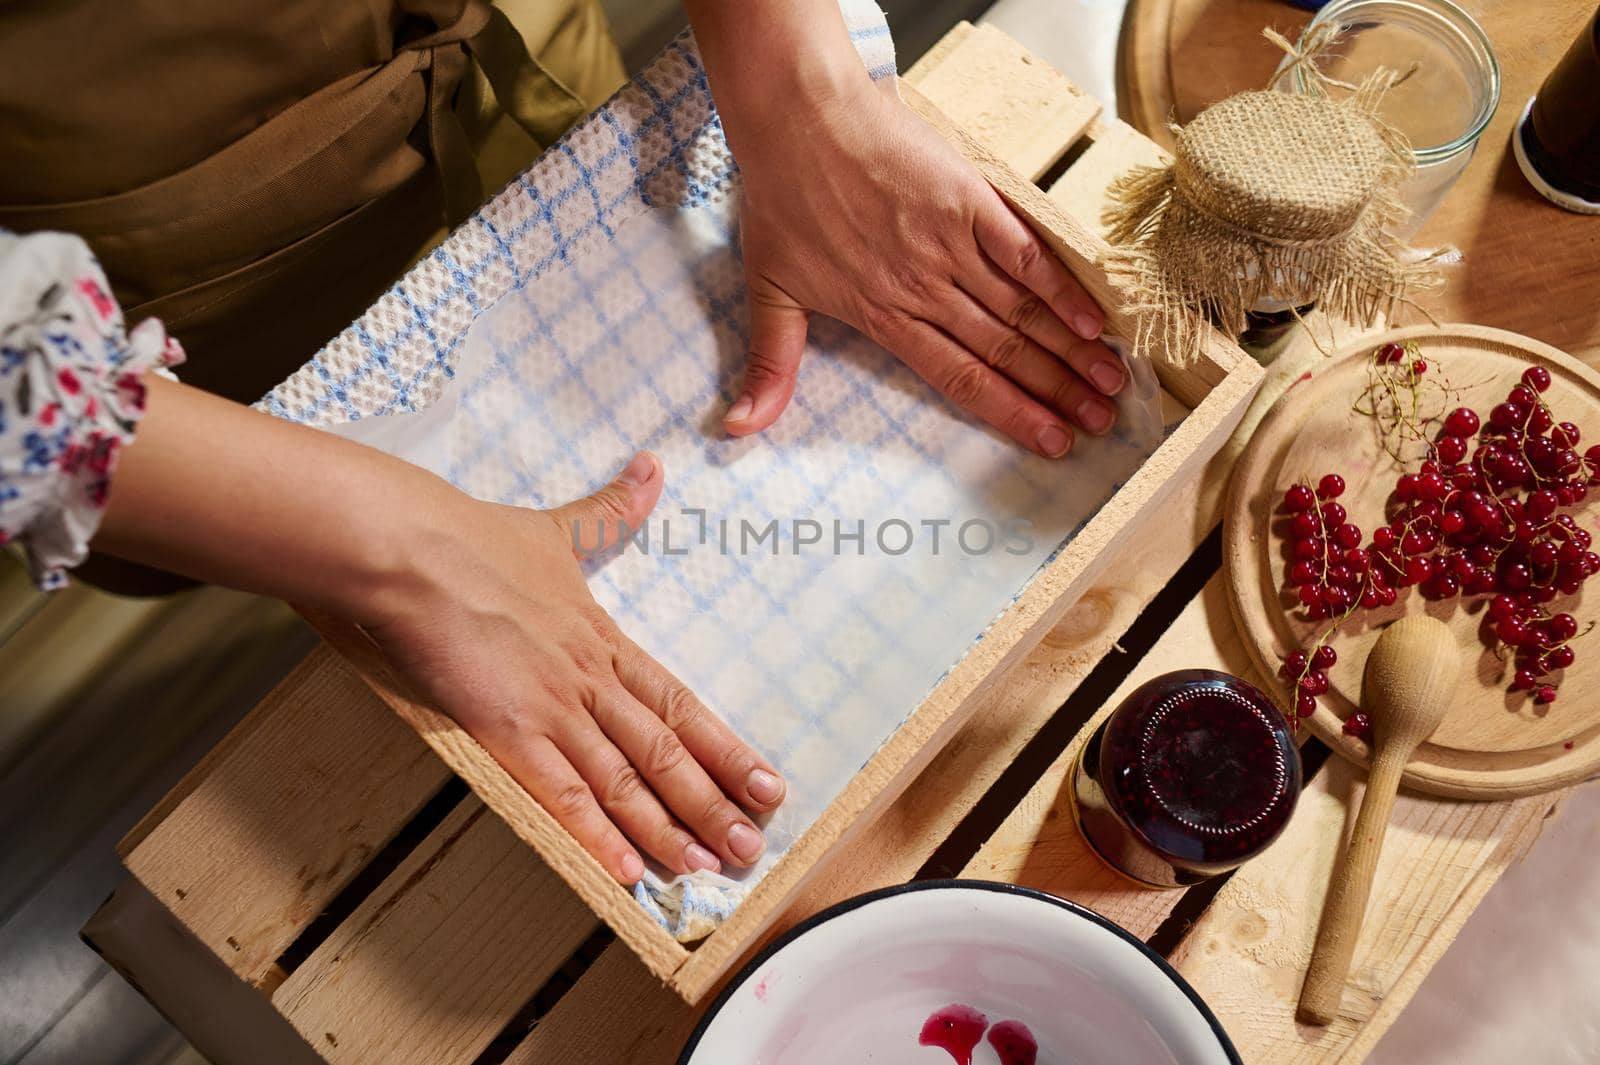 Housewife's hands arranging jars with handmade jam upside down in a wooden crate and covering them with a waffle towel by artgf